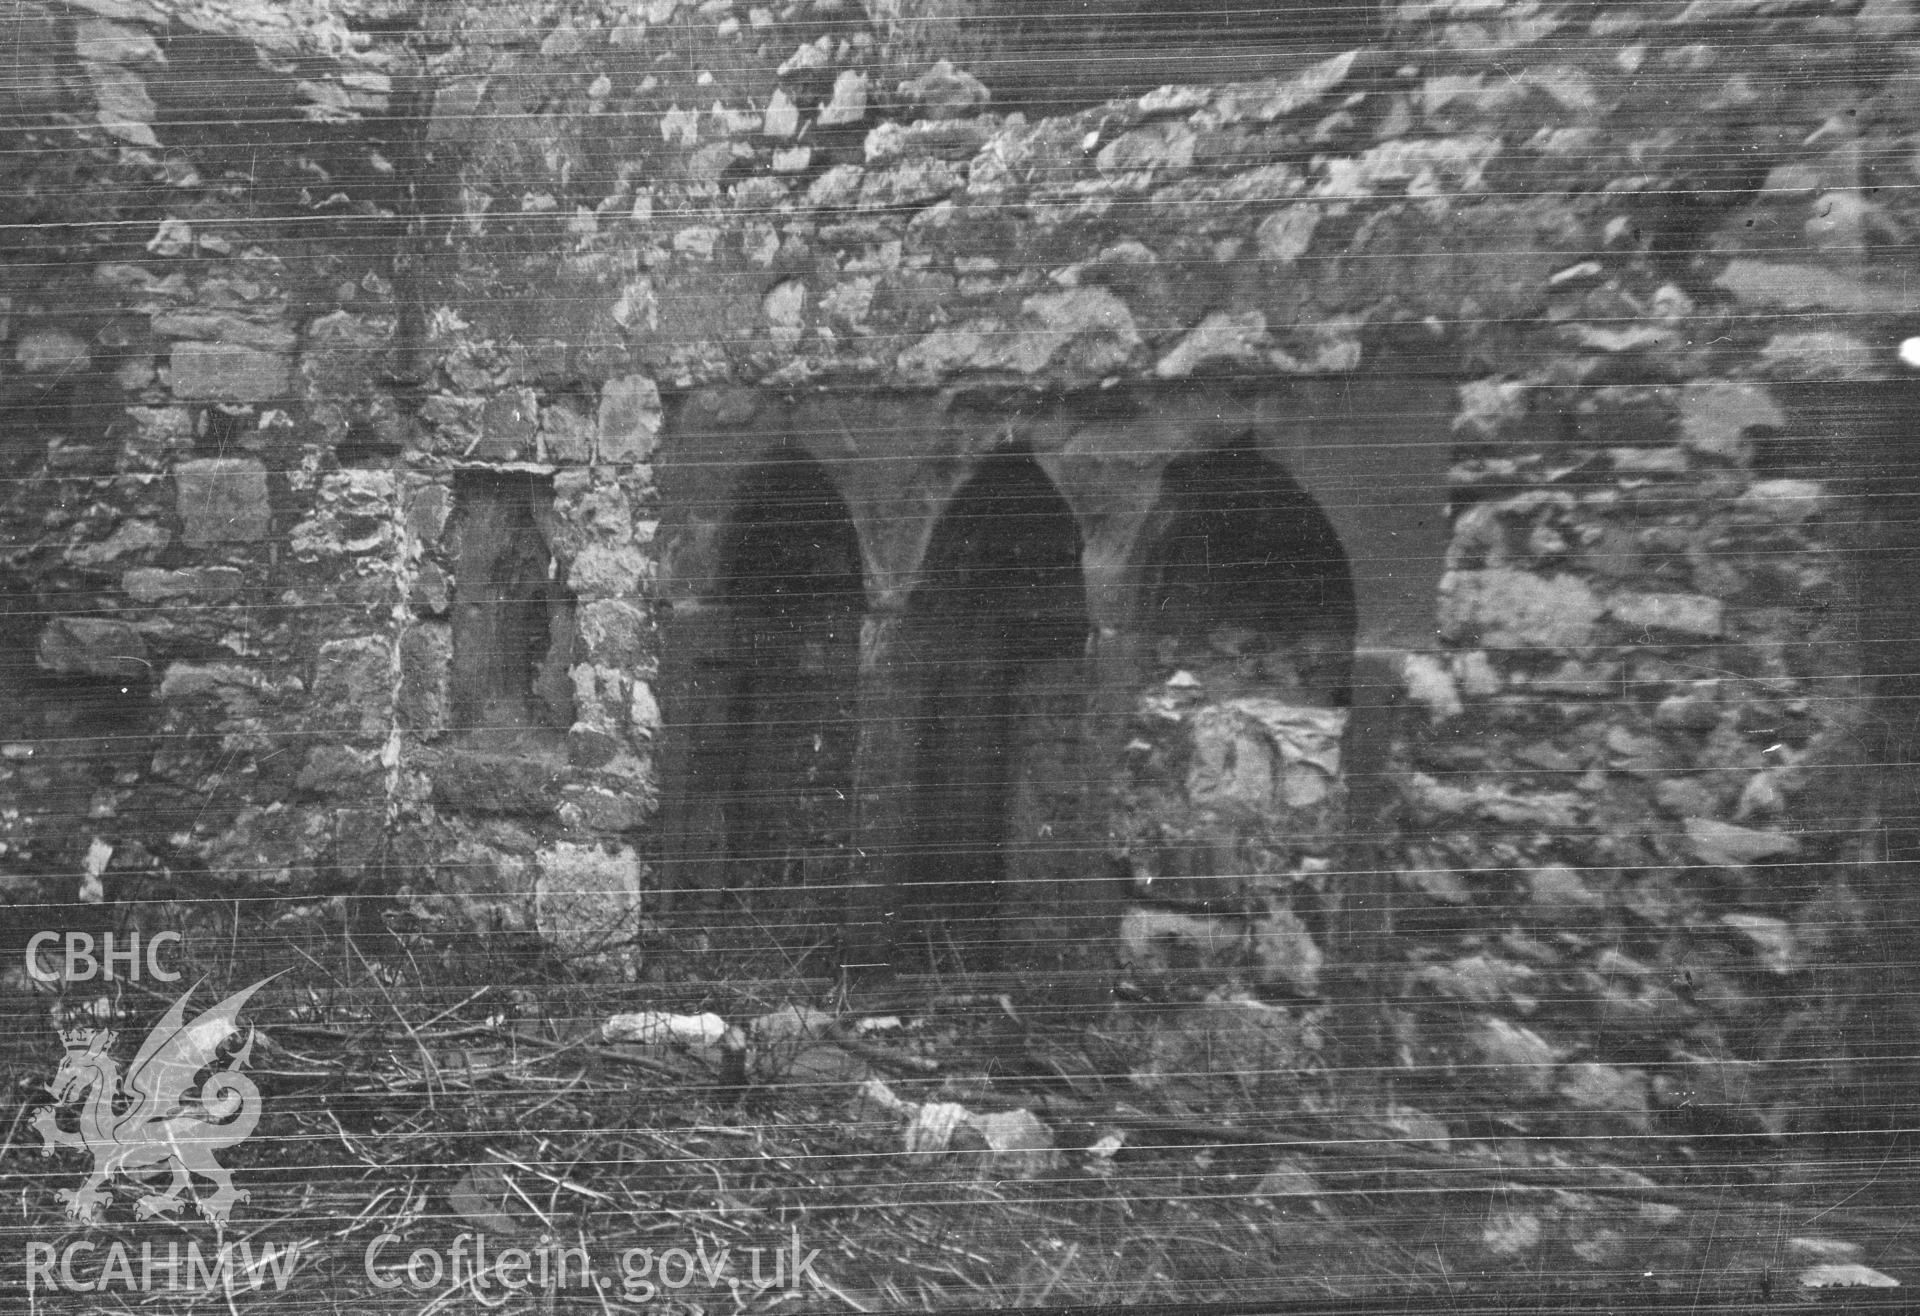 Digital copy of a nitrate negative showing view of White Friars, Denbigh.